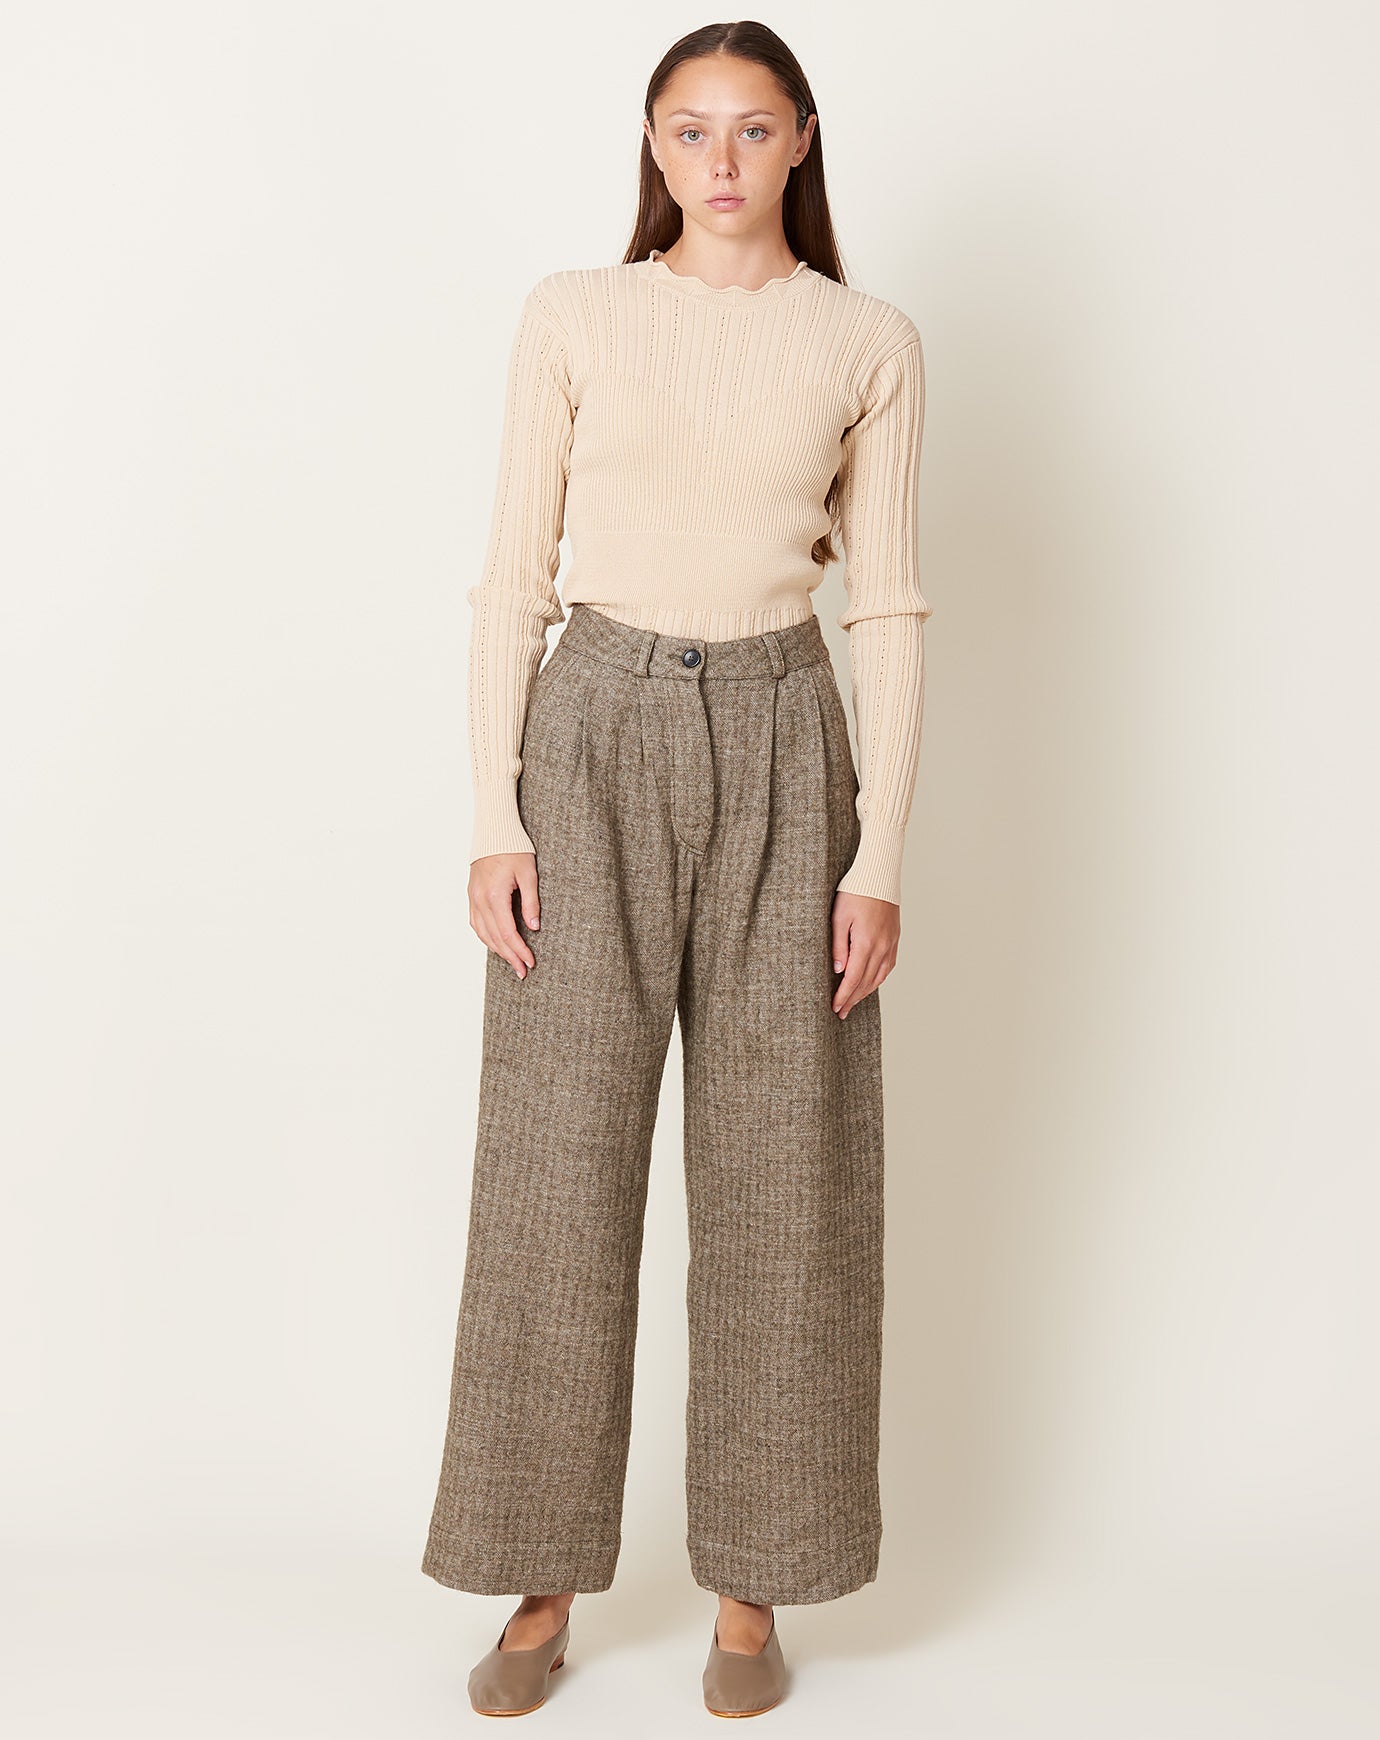 Cawley Japanese Linen Wool Mara Trouser in Natural and Grey